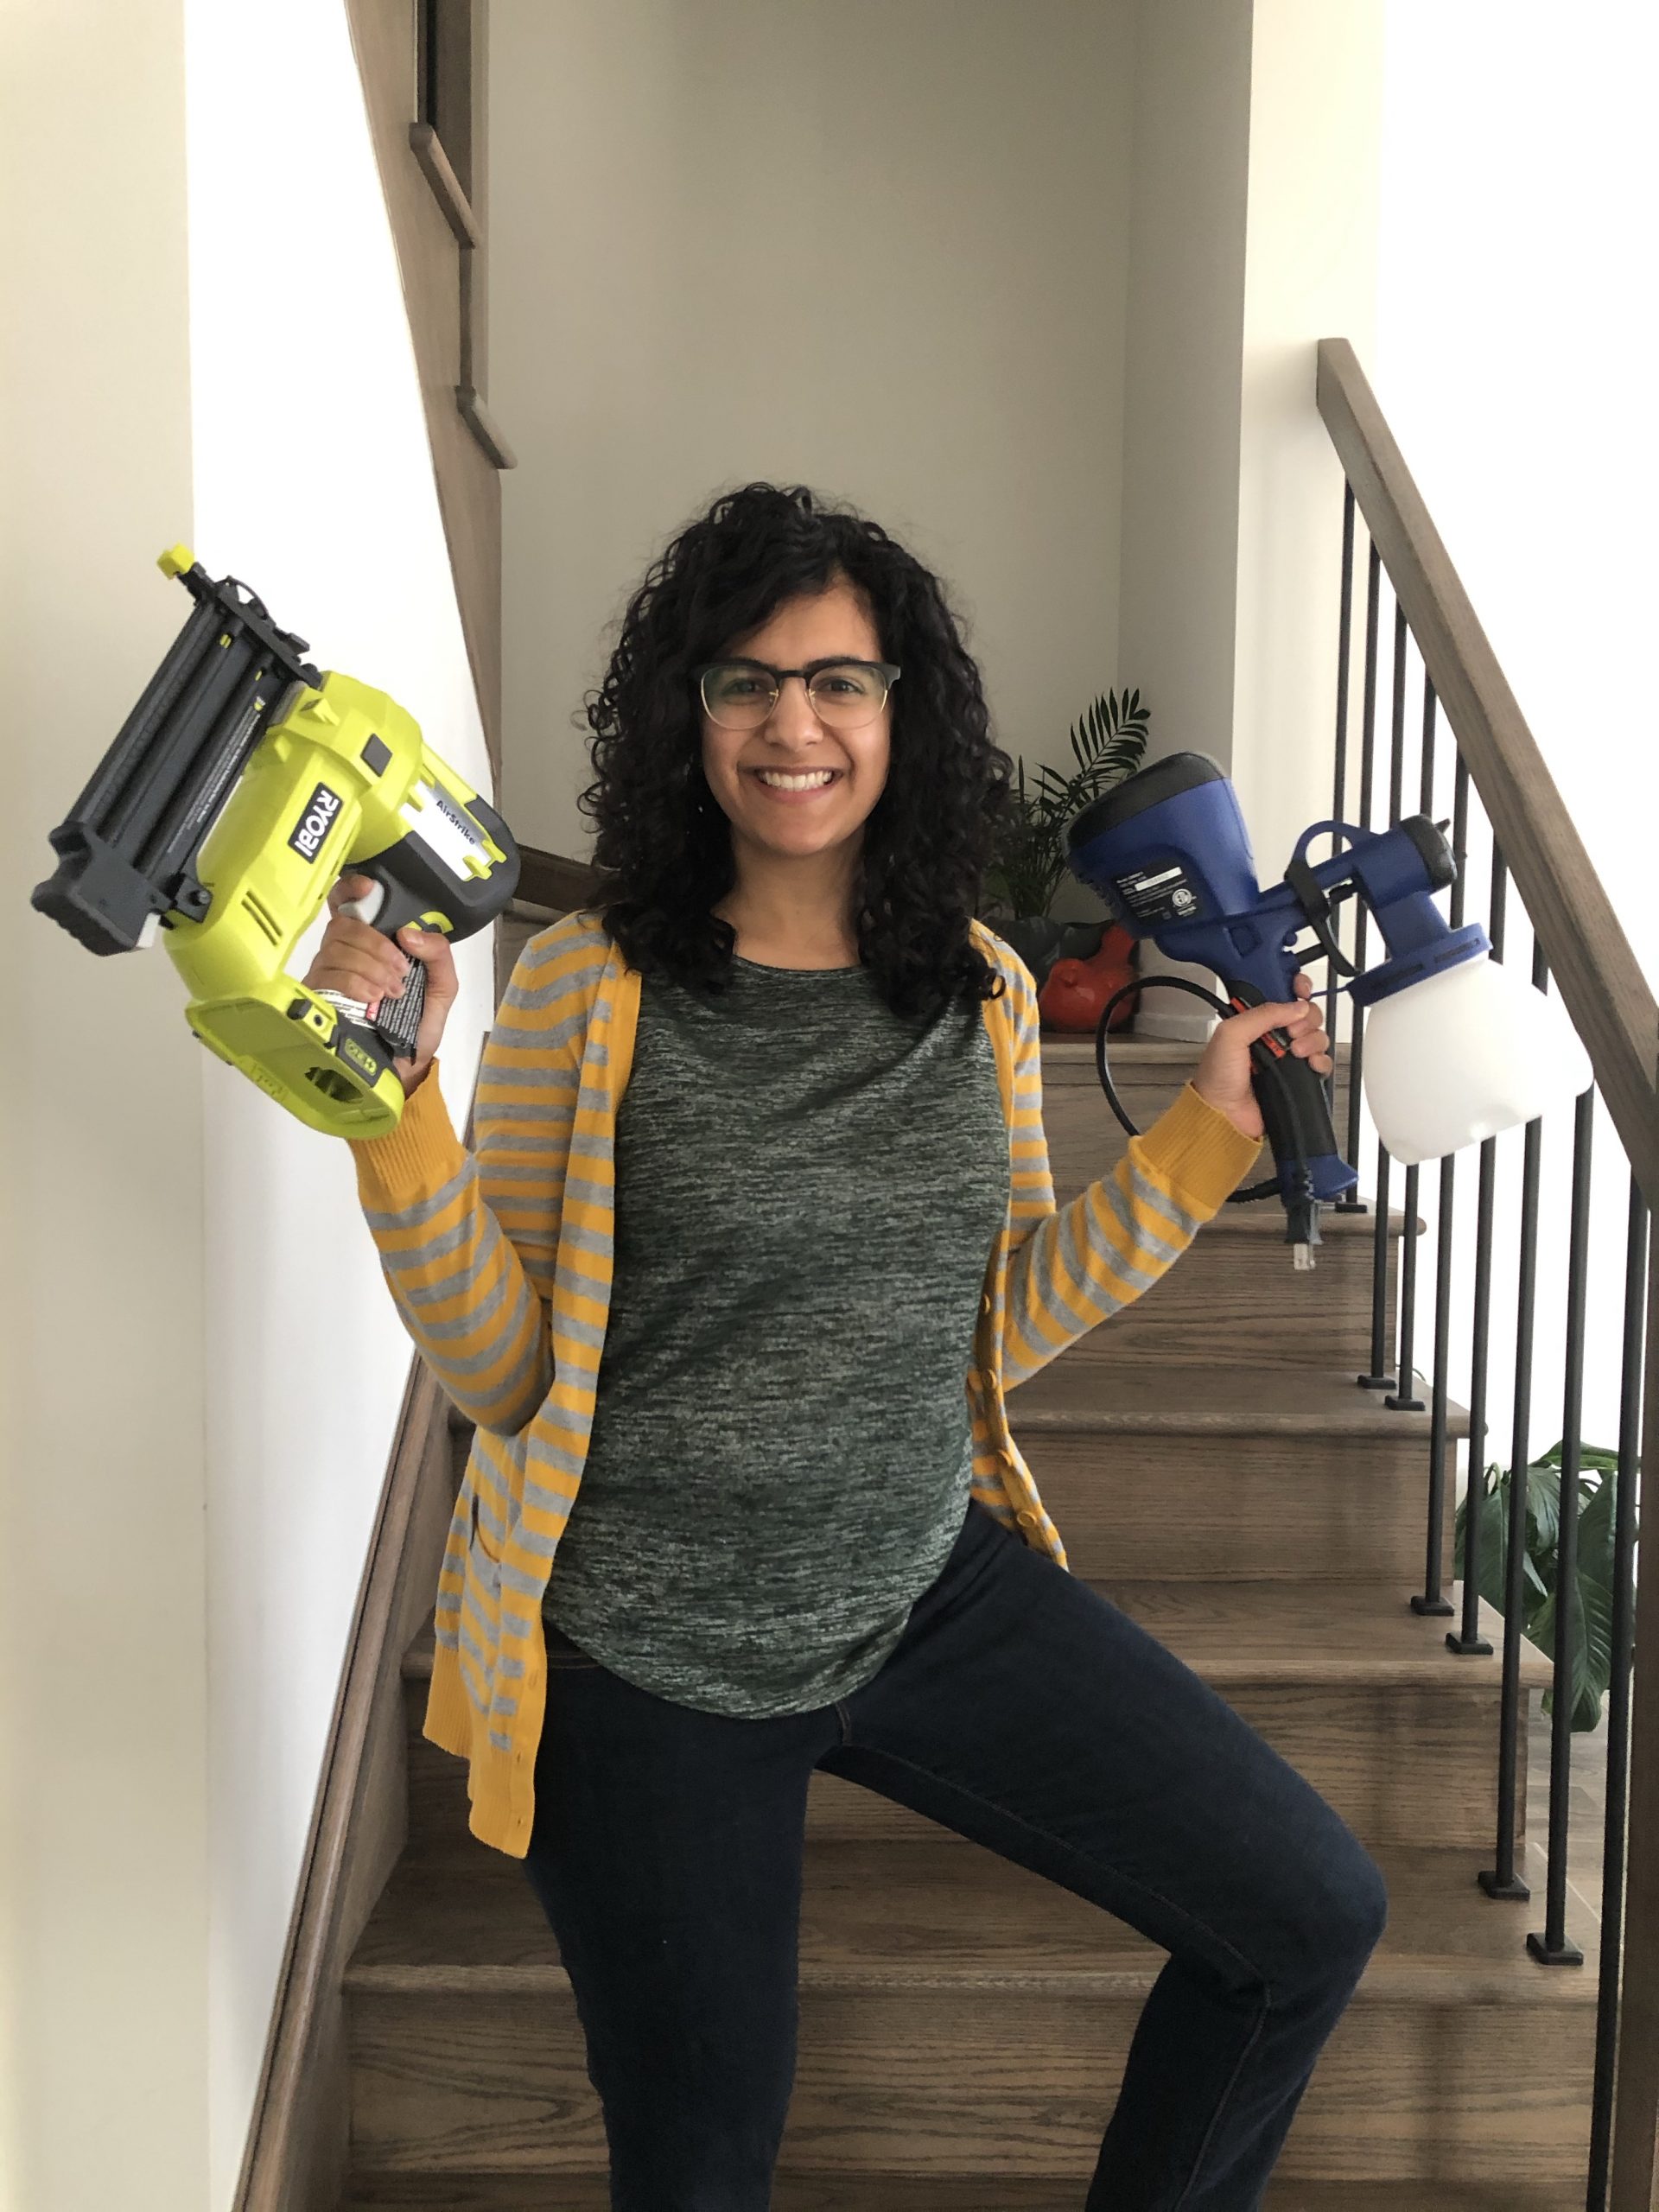 A DIY enthusiast holding a nail gun and paint sprayer, ready to tackle a bathroom accent wall